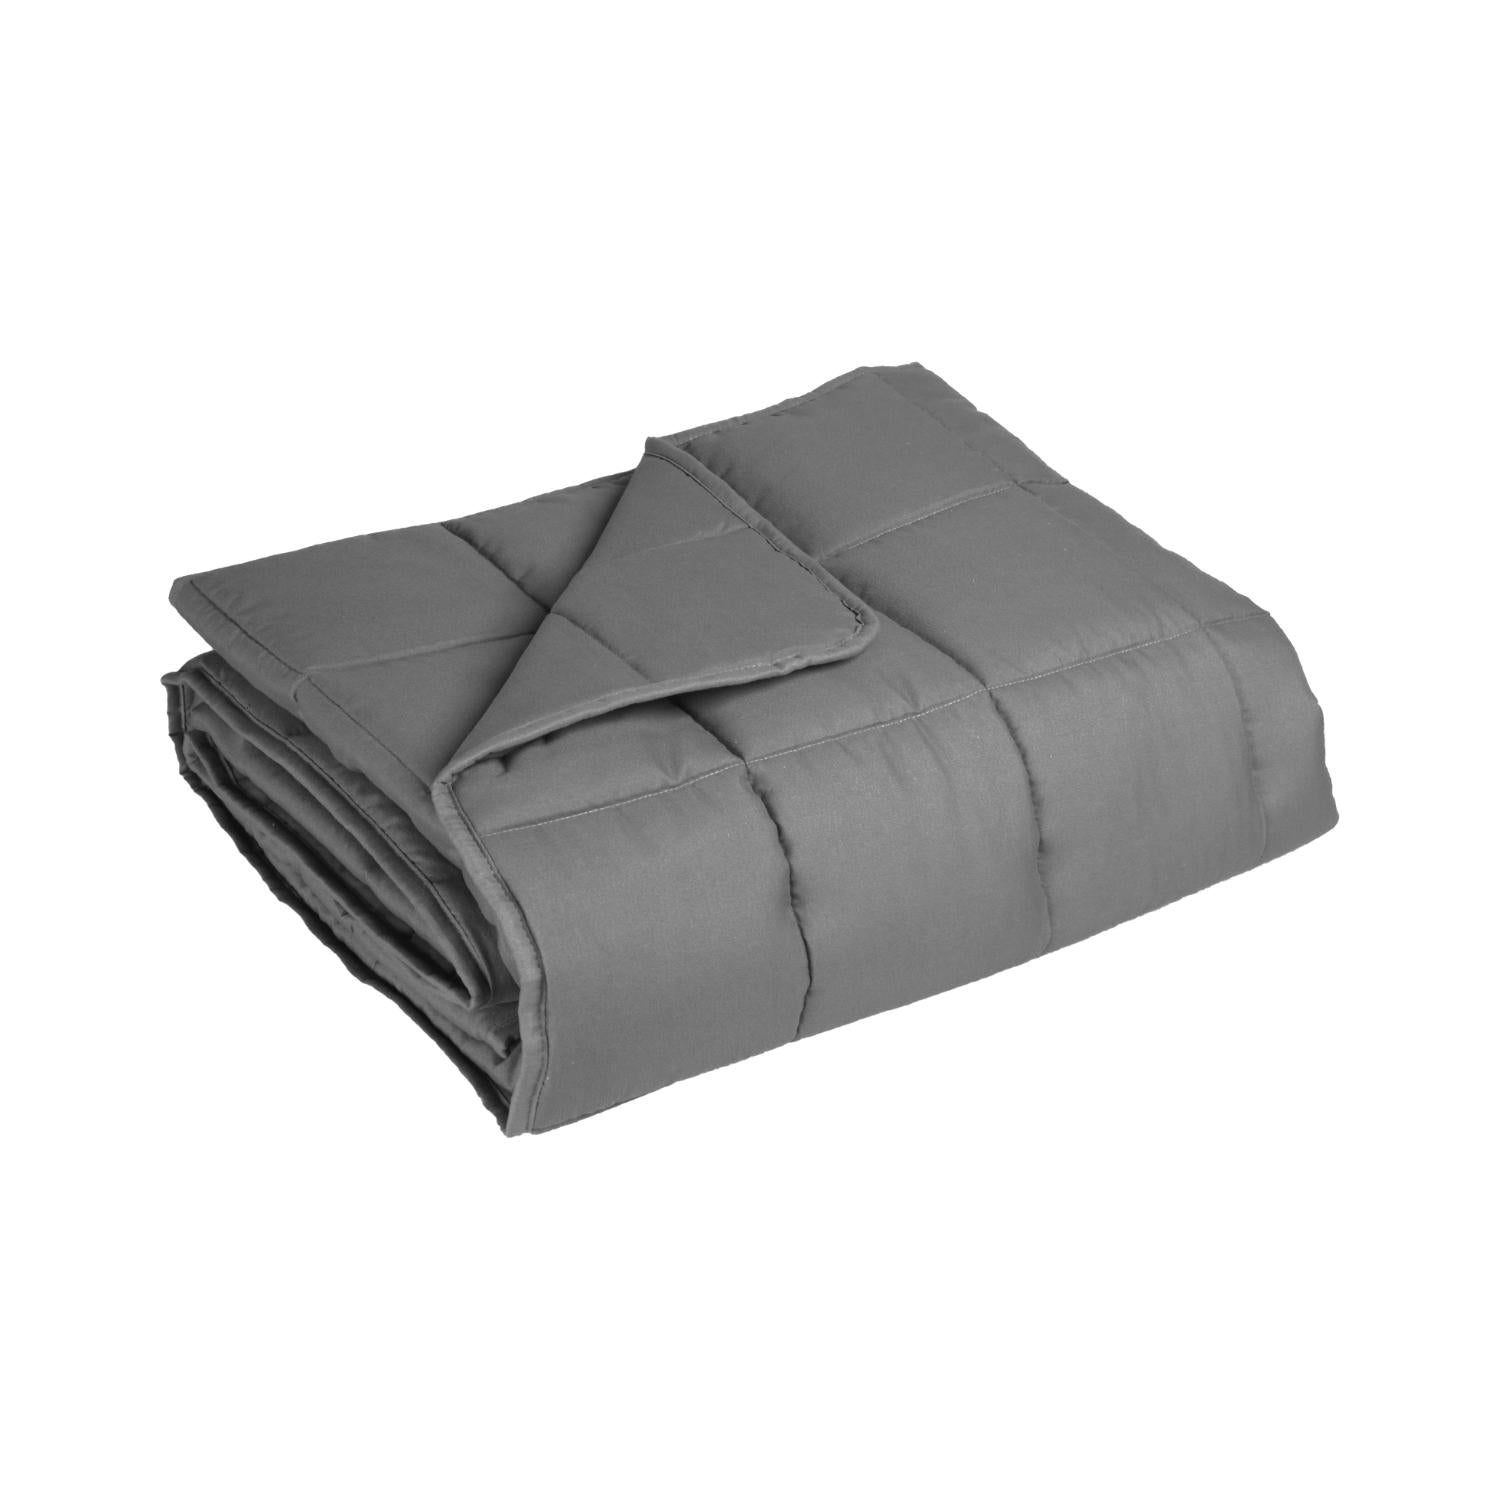 Gominimo Weighted Blanket 7KG Light Grey